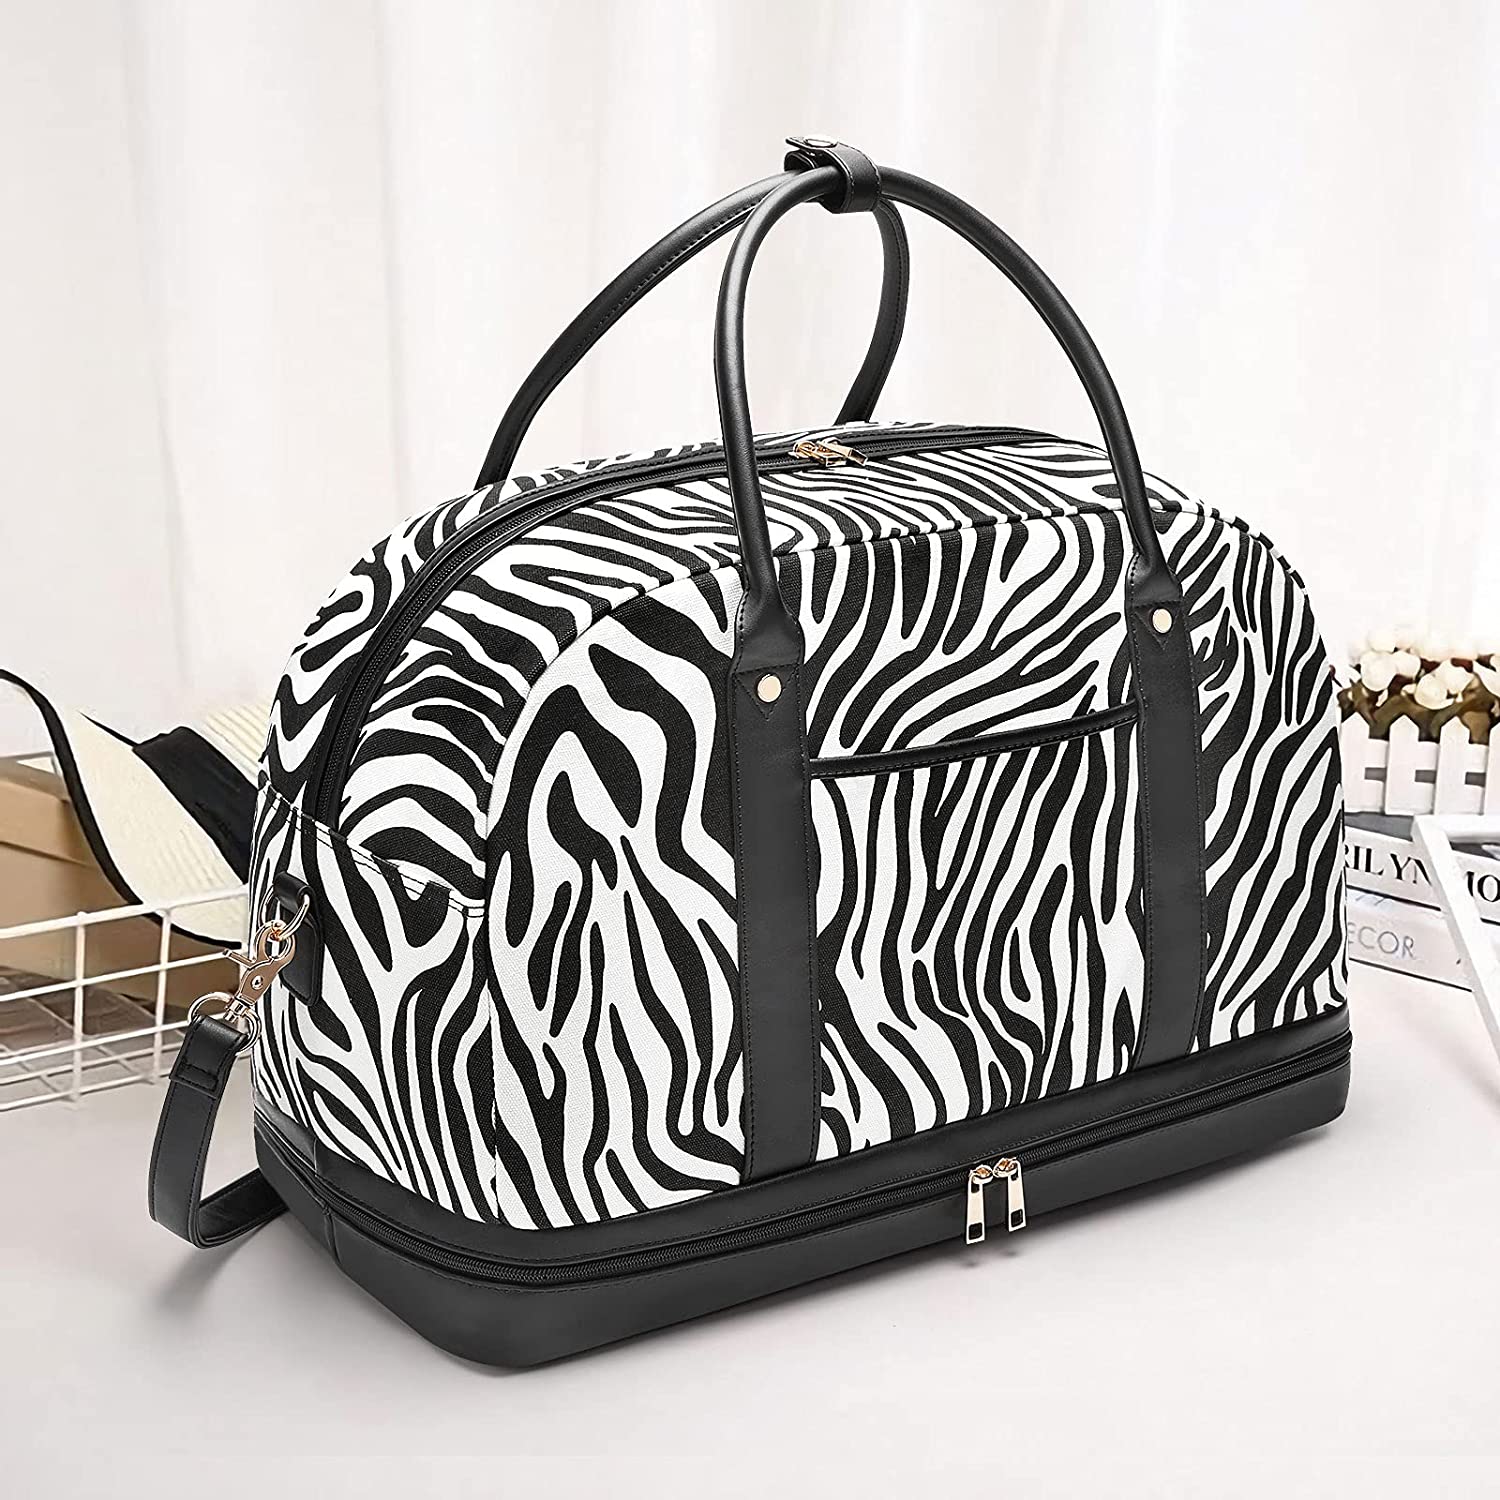 Women Stylish Canvas Travel Duffel Weekender Bag Overnight Bag Carry On  with Shoe Compartment and Free Toiletry bag HB-10 (Zebra Striped)